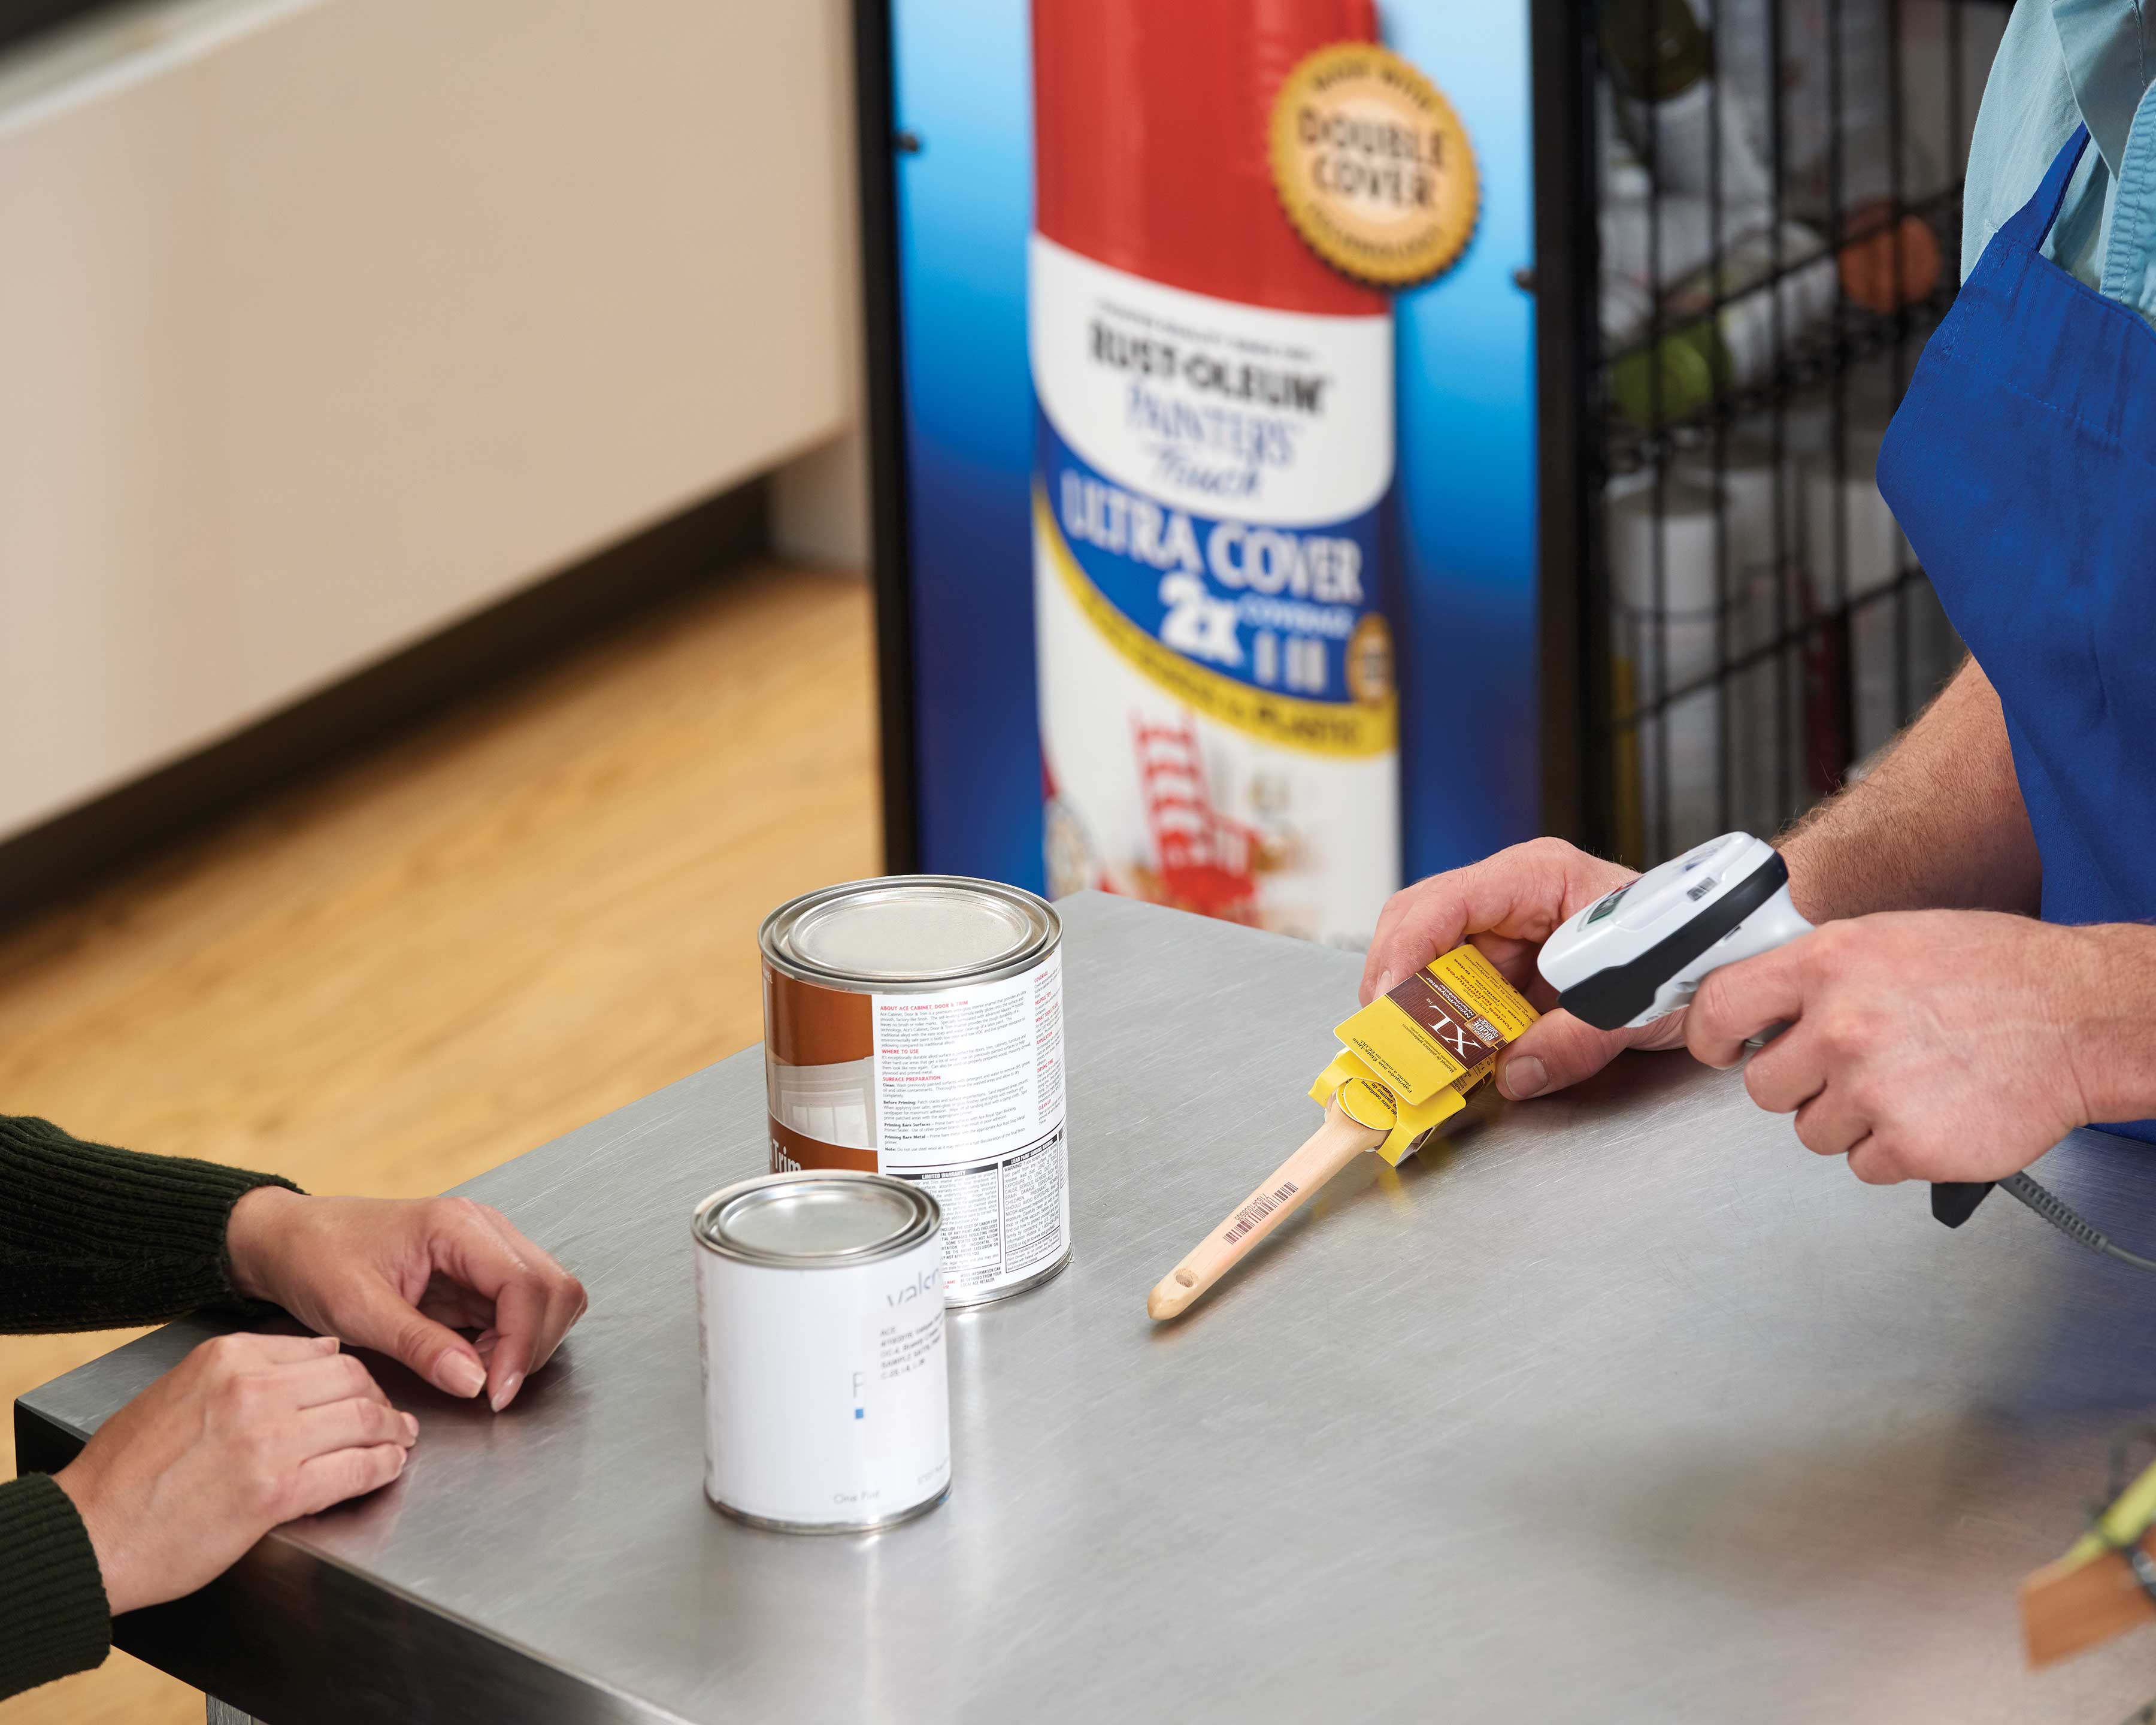 Employee scanning paint supplies for a customer